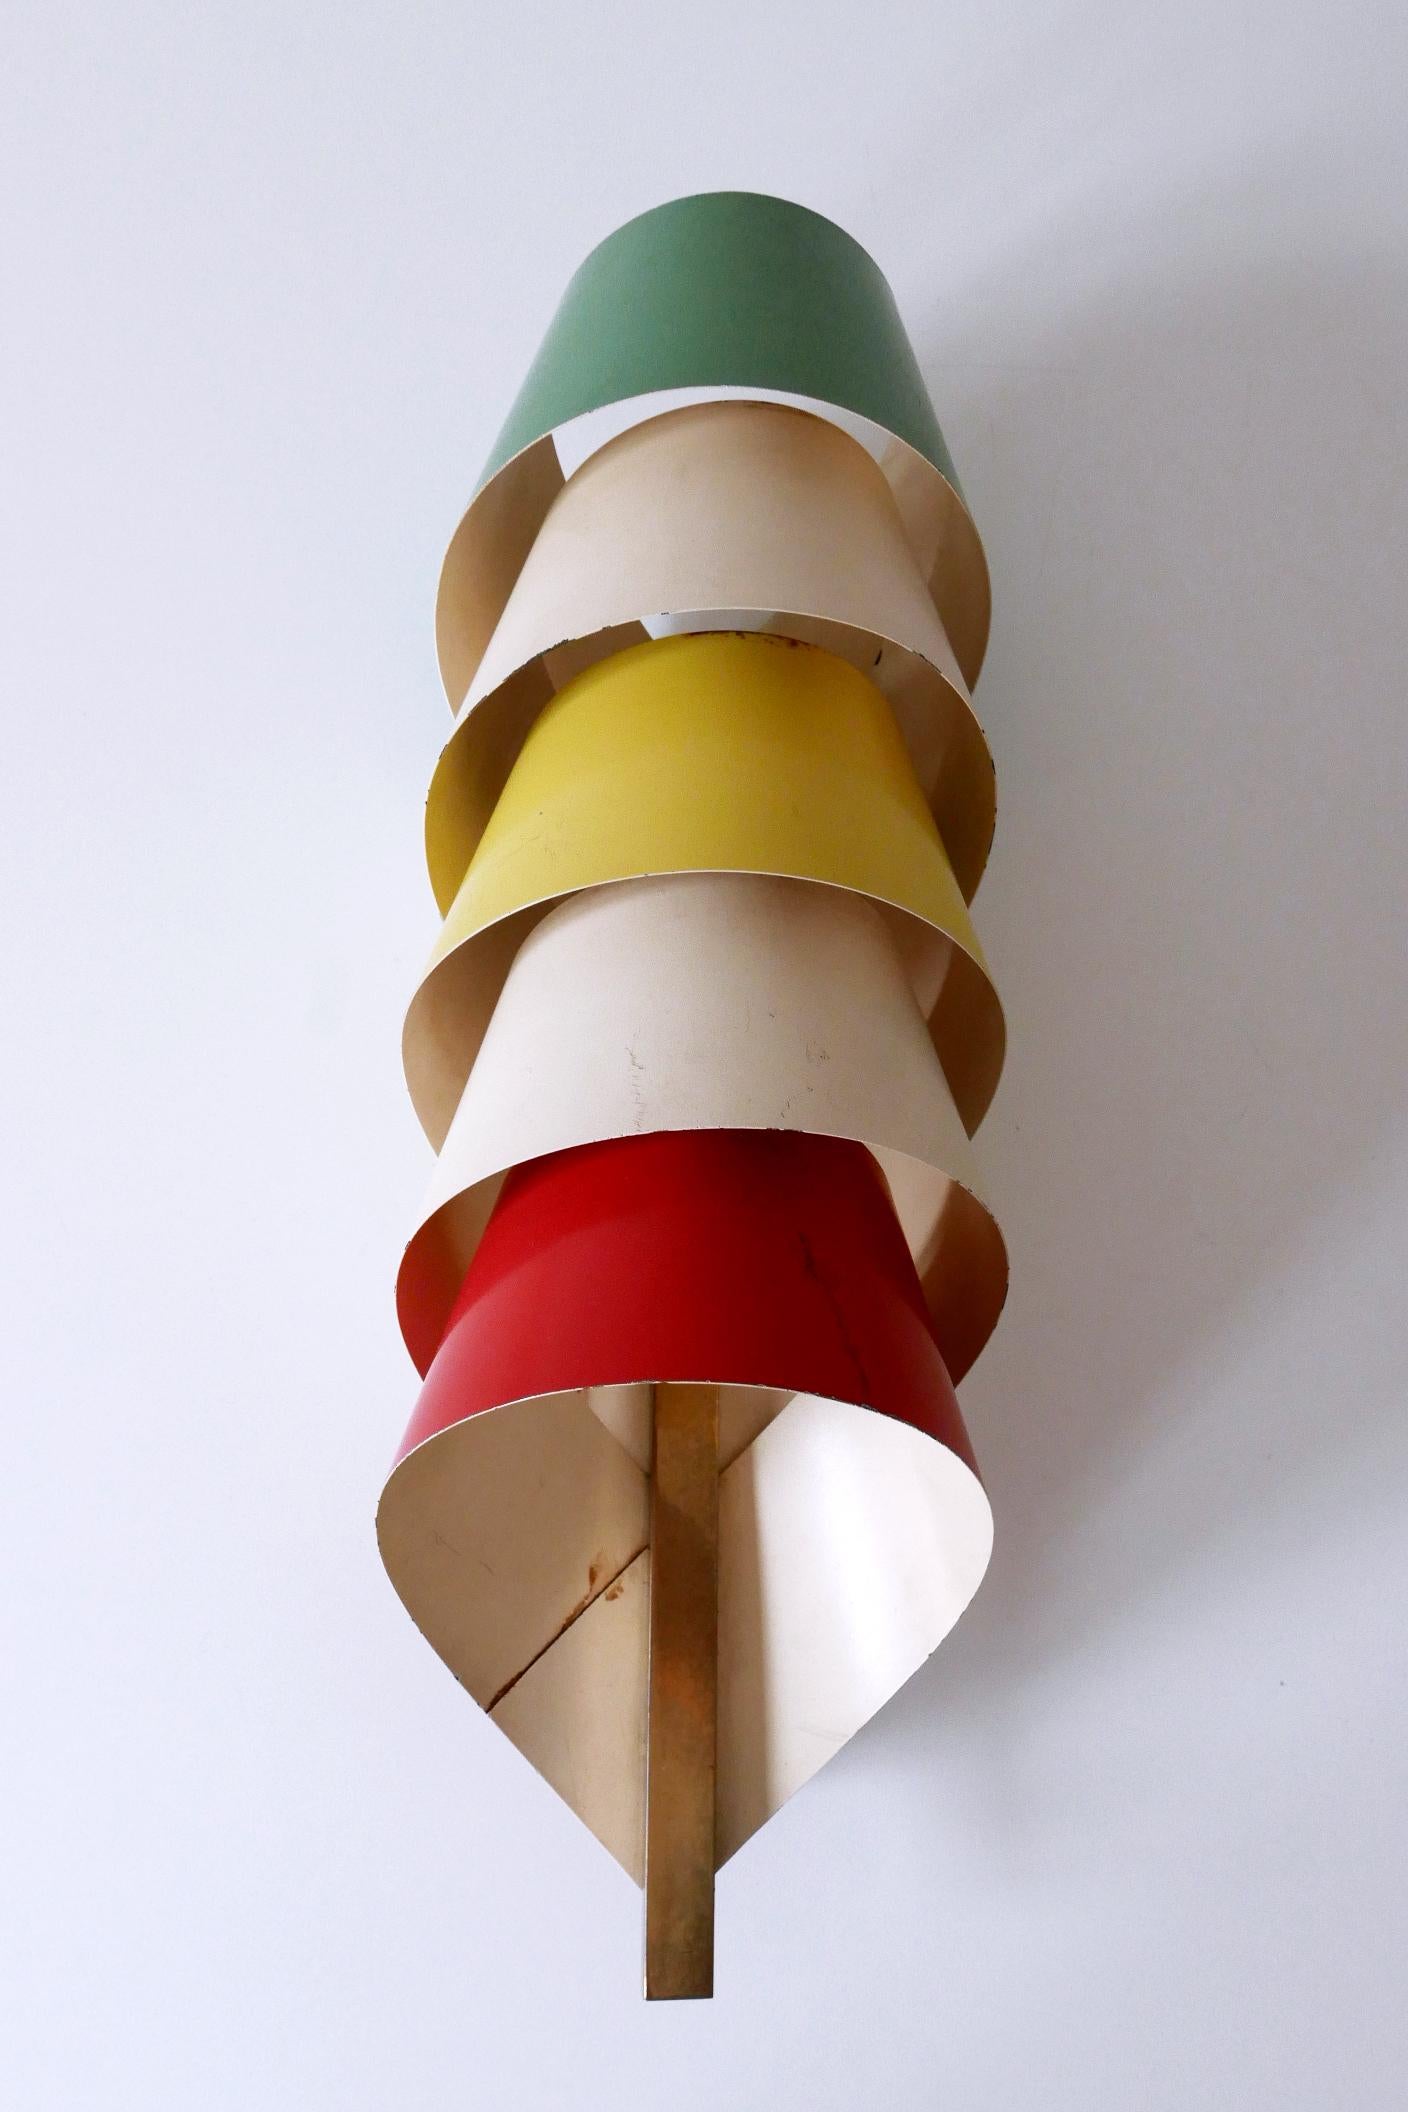 Rare & Decorative Mid-Century Modern Sconce or Wall Lamp Scandinavia 1950s For Sale 5